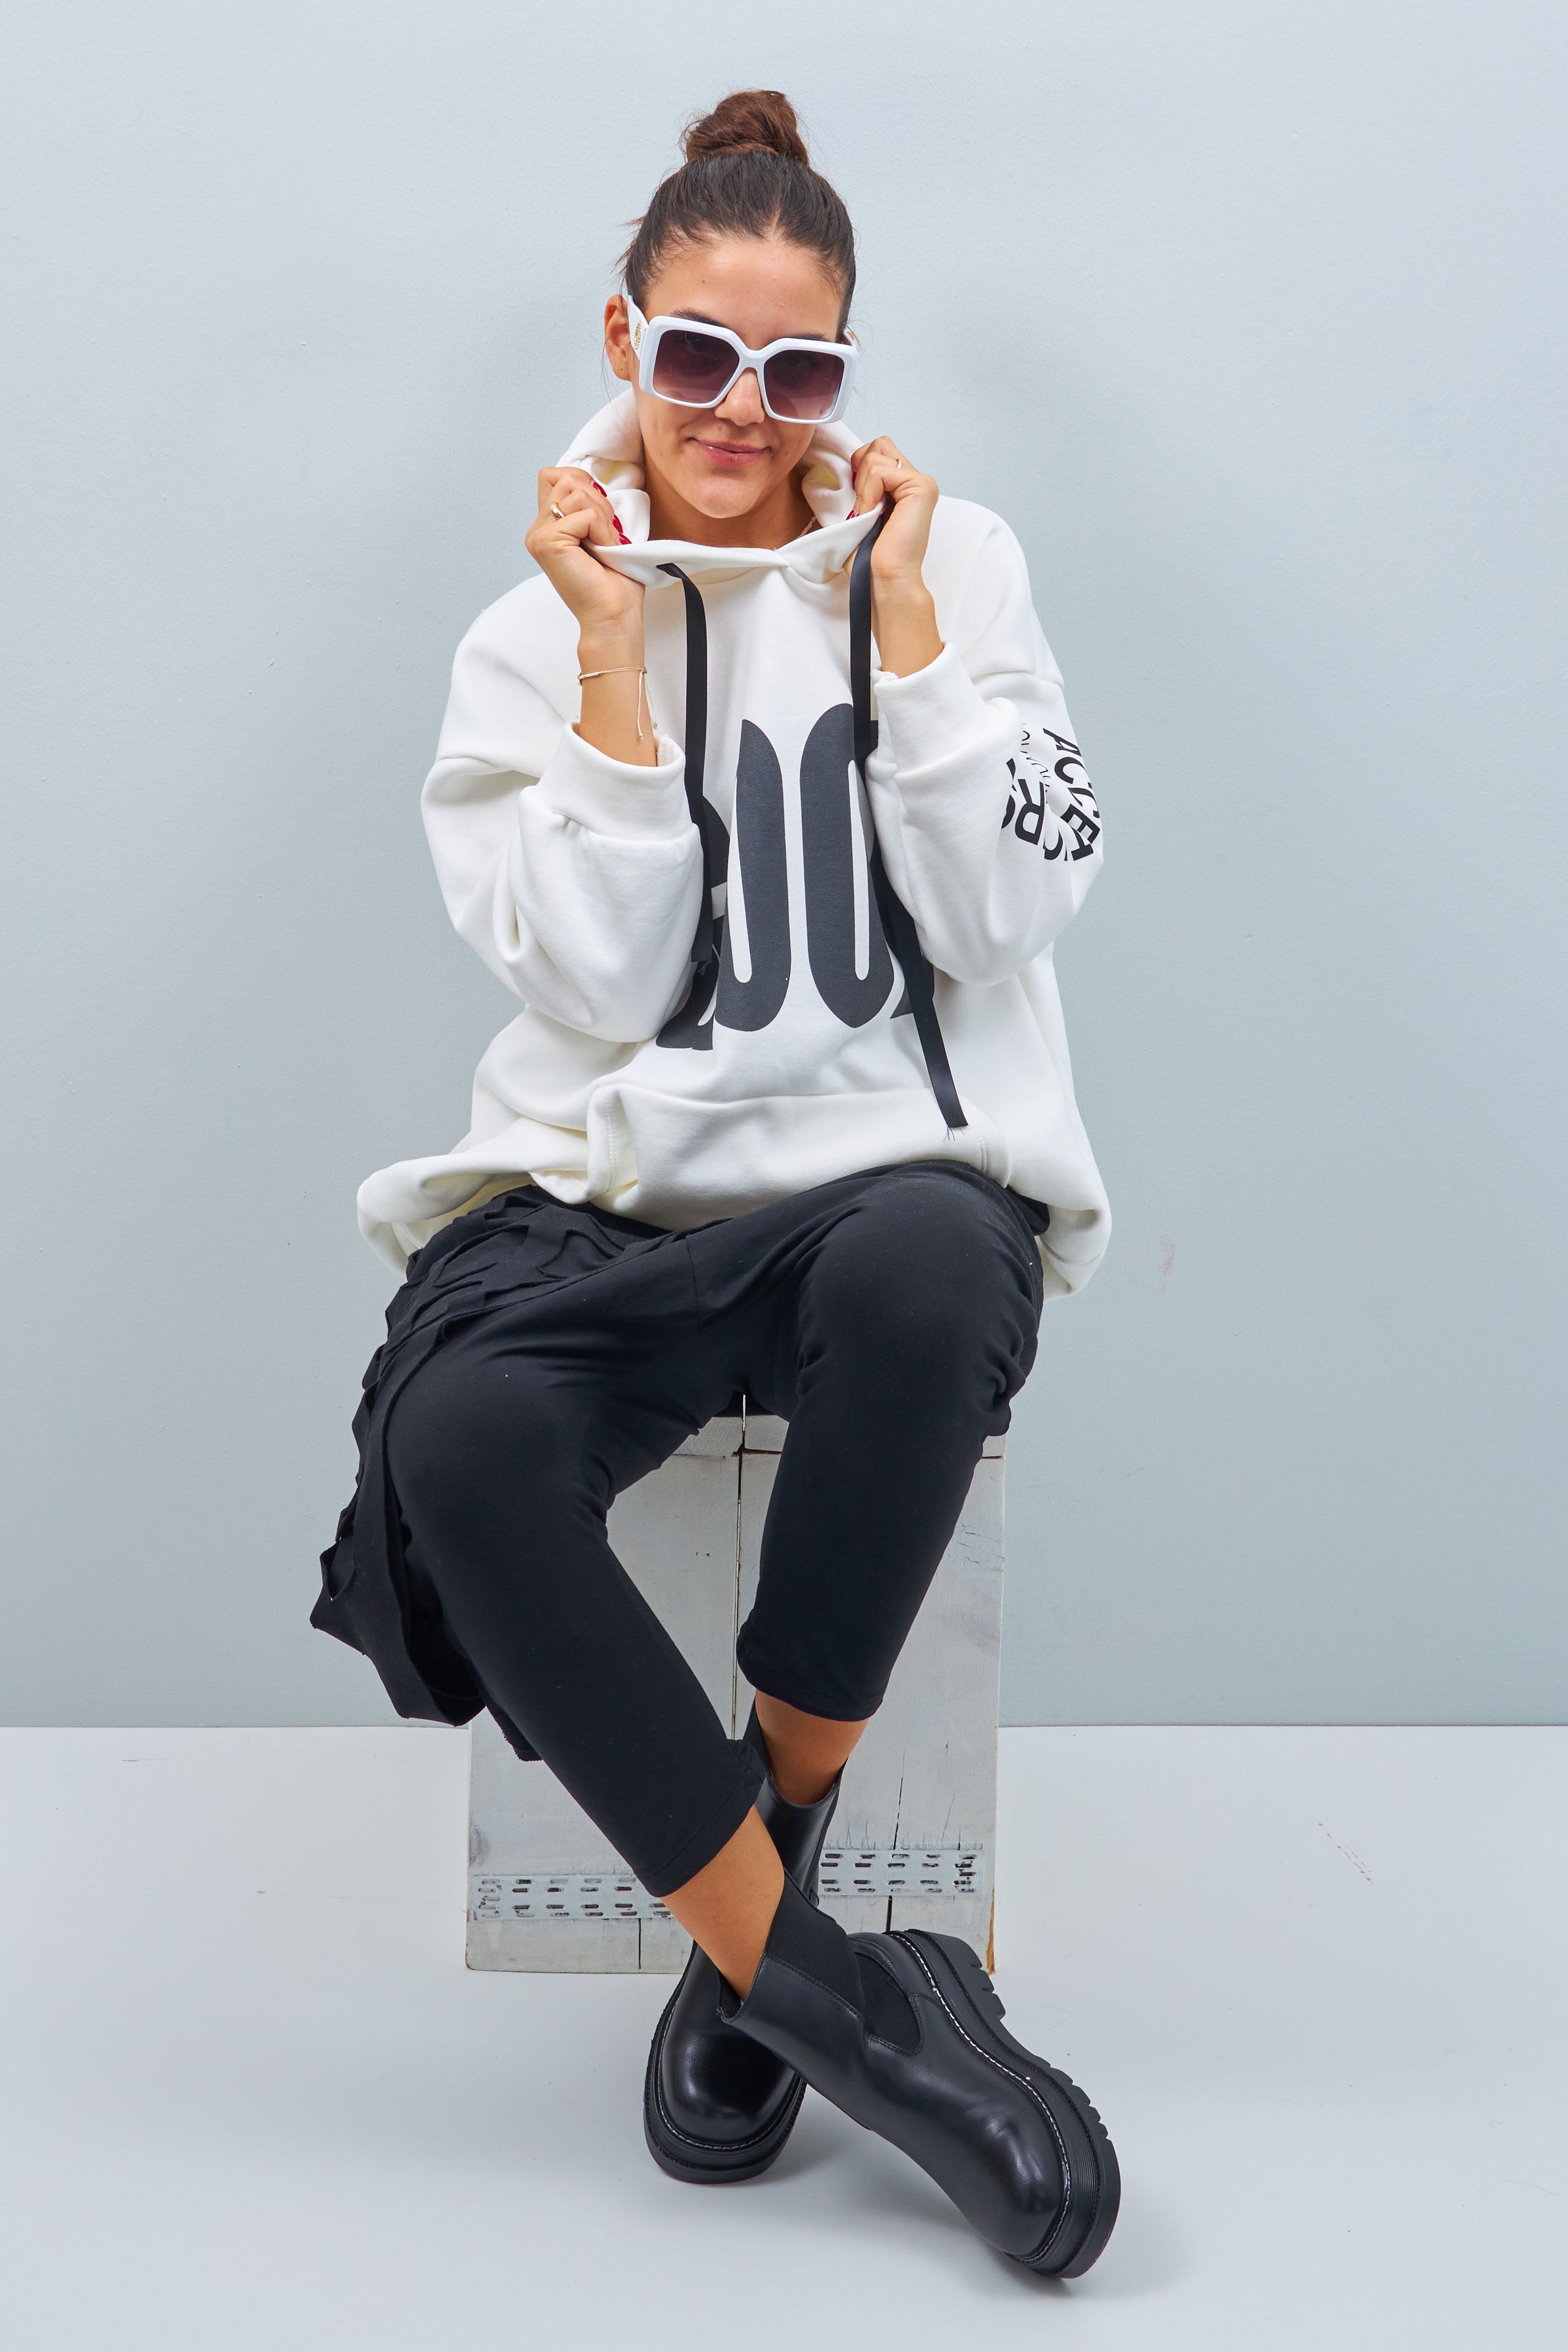 Oversized hoodie with GOOD lettering, white